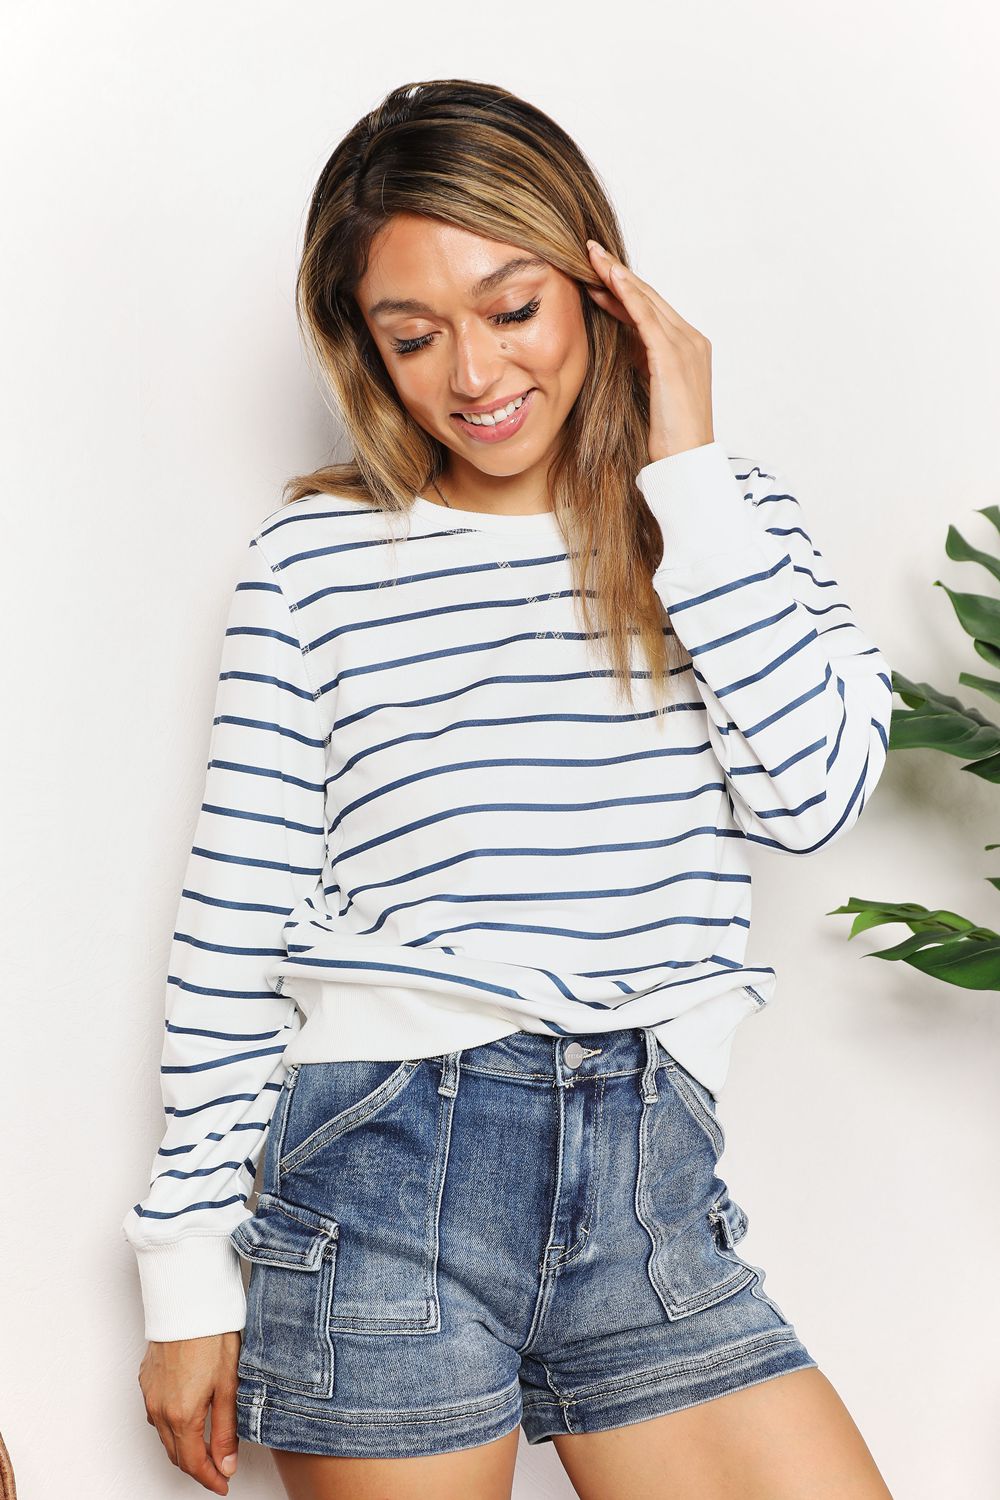 long sleeve black and white striped top